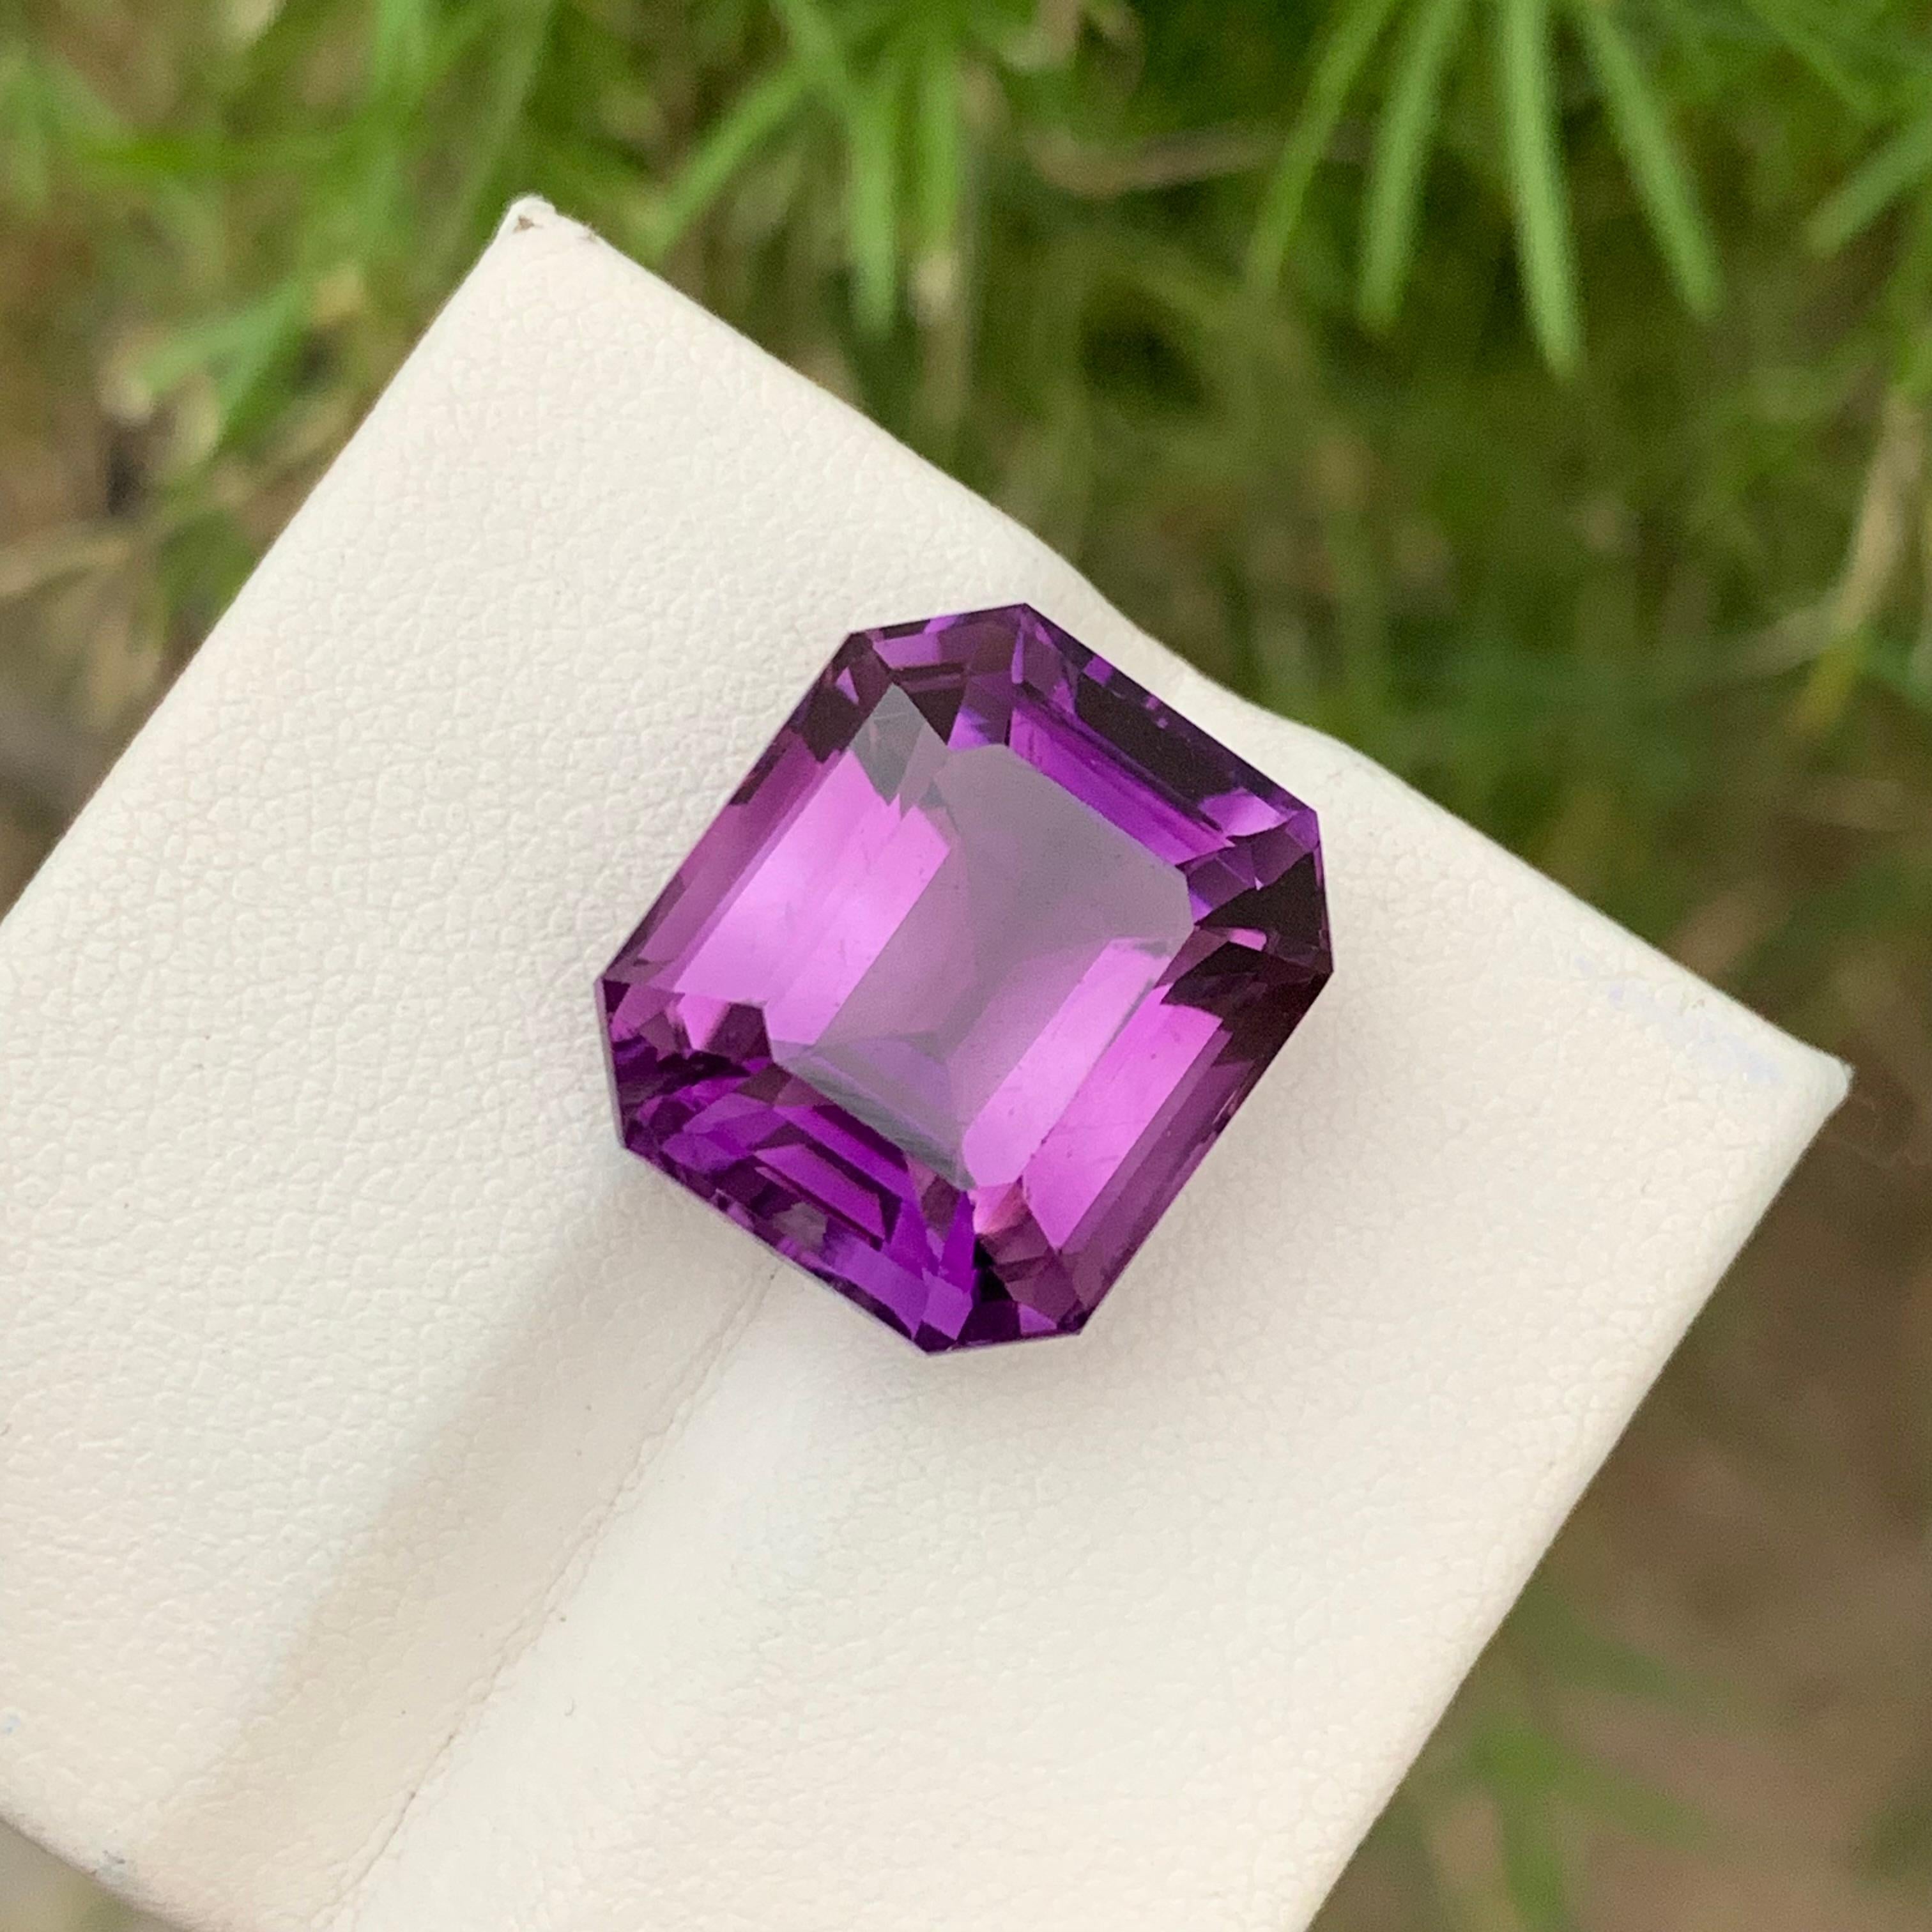 19.0 Carats Natural Loose Deep Purple Amethyst Gemstone From Brazil Mine For Sale 2